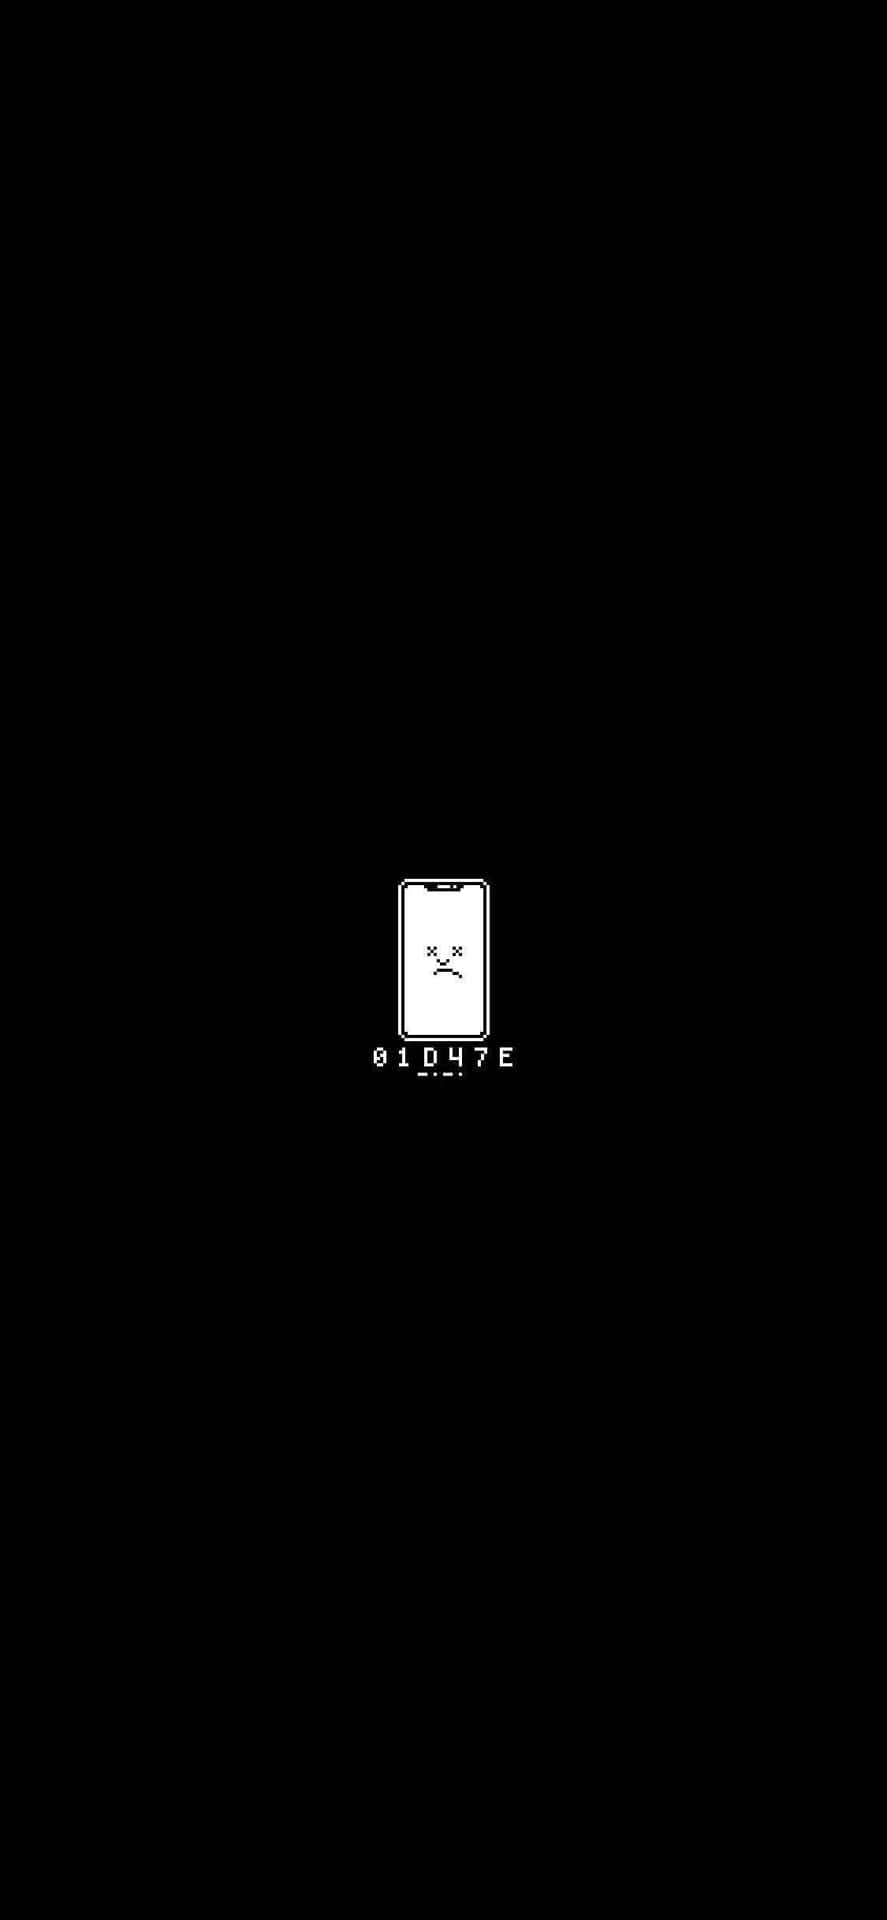 "Even the most advanced phone has a moment of sadness." Wallpaper